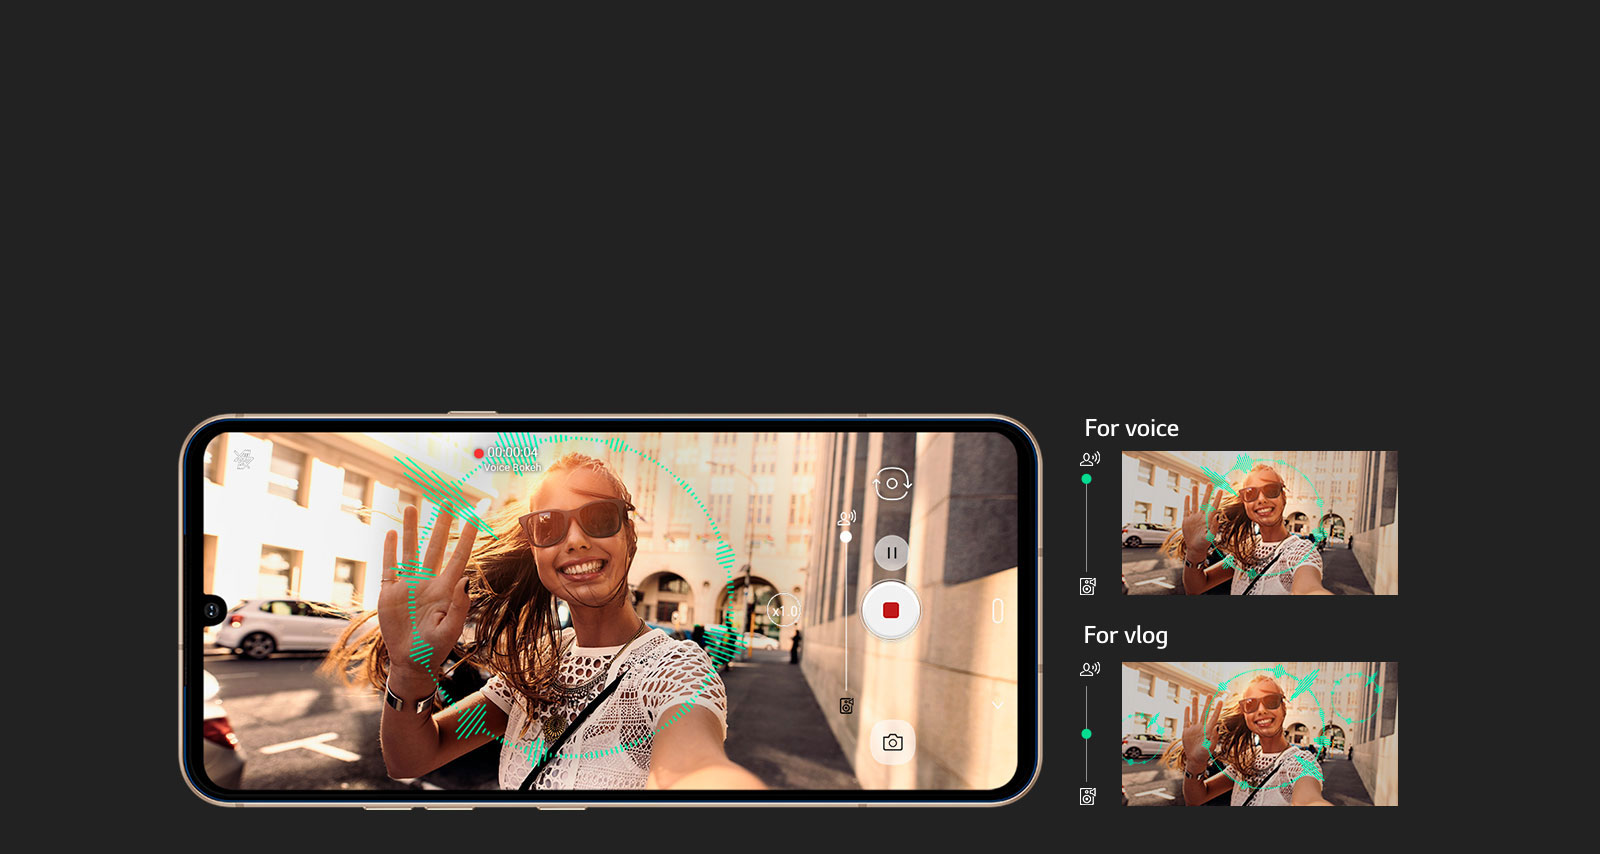 Image of woman using Voice Bokeh function for voice and for vlog